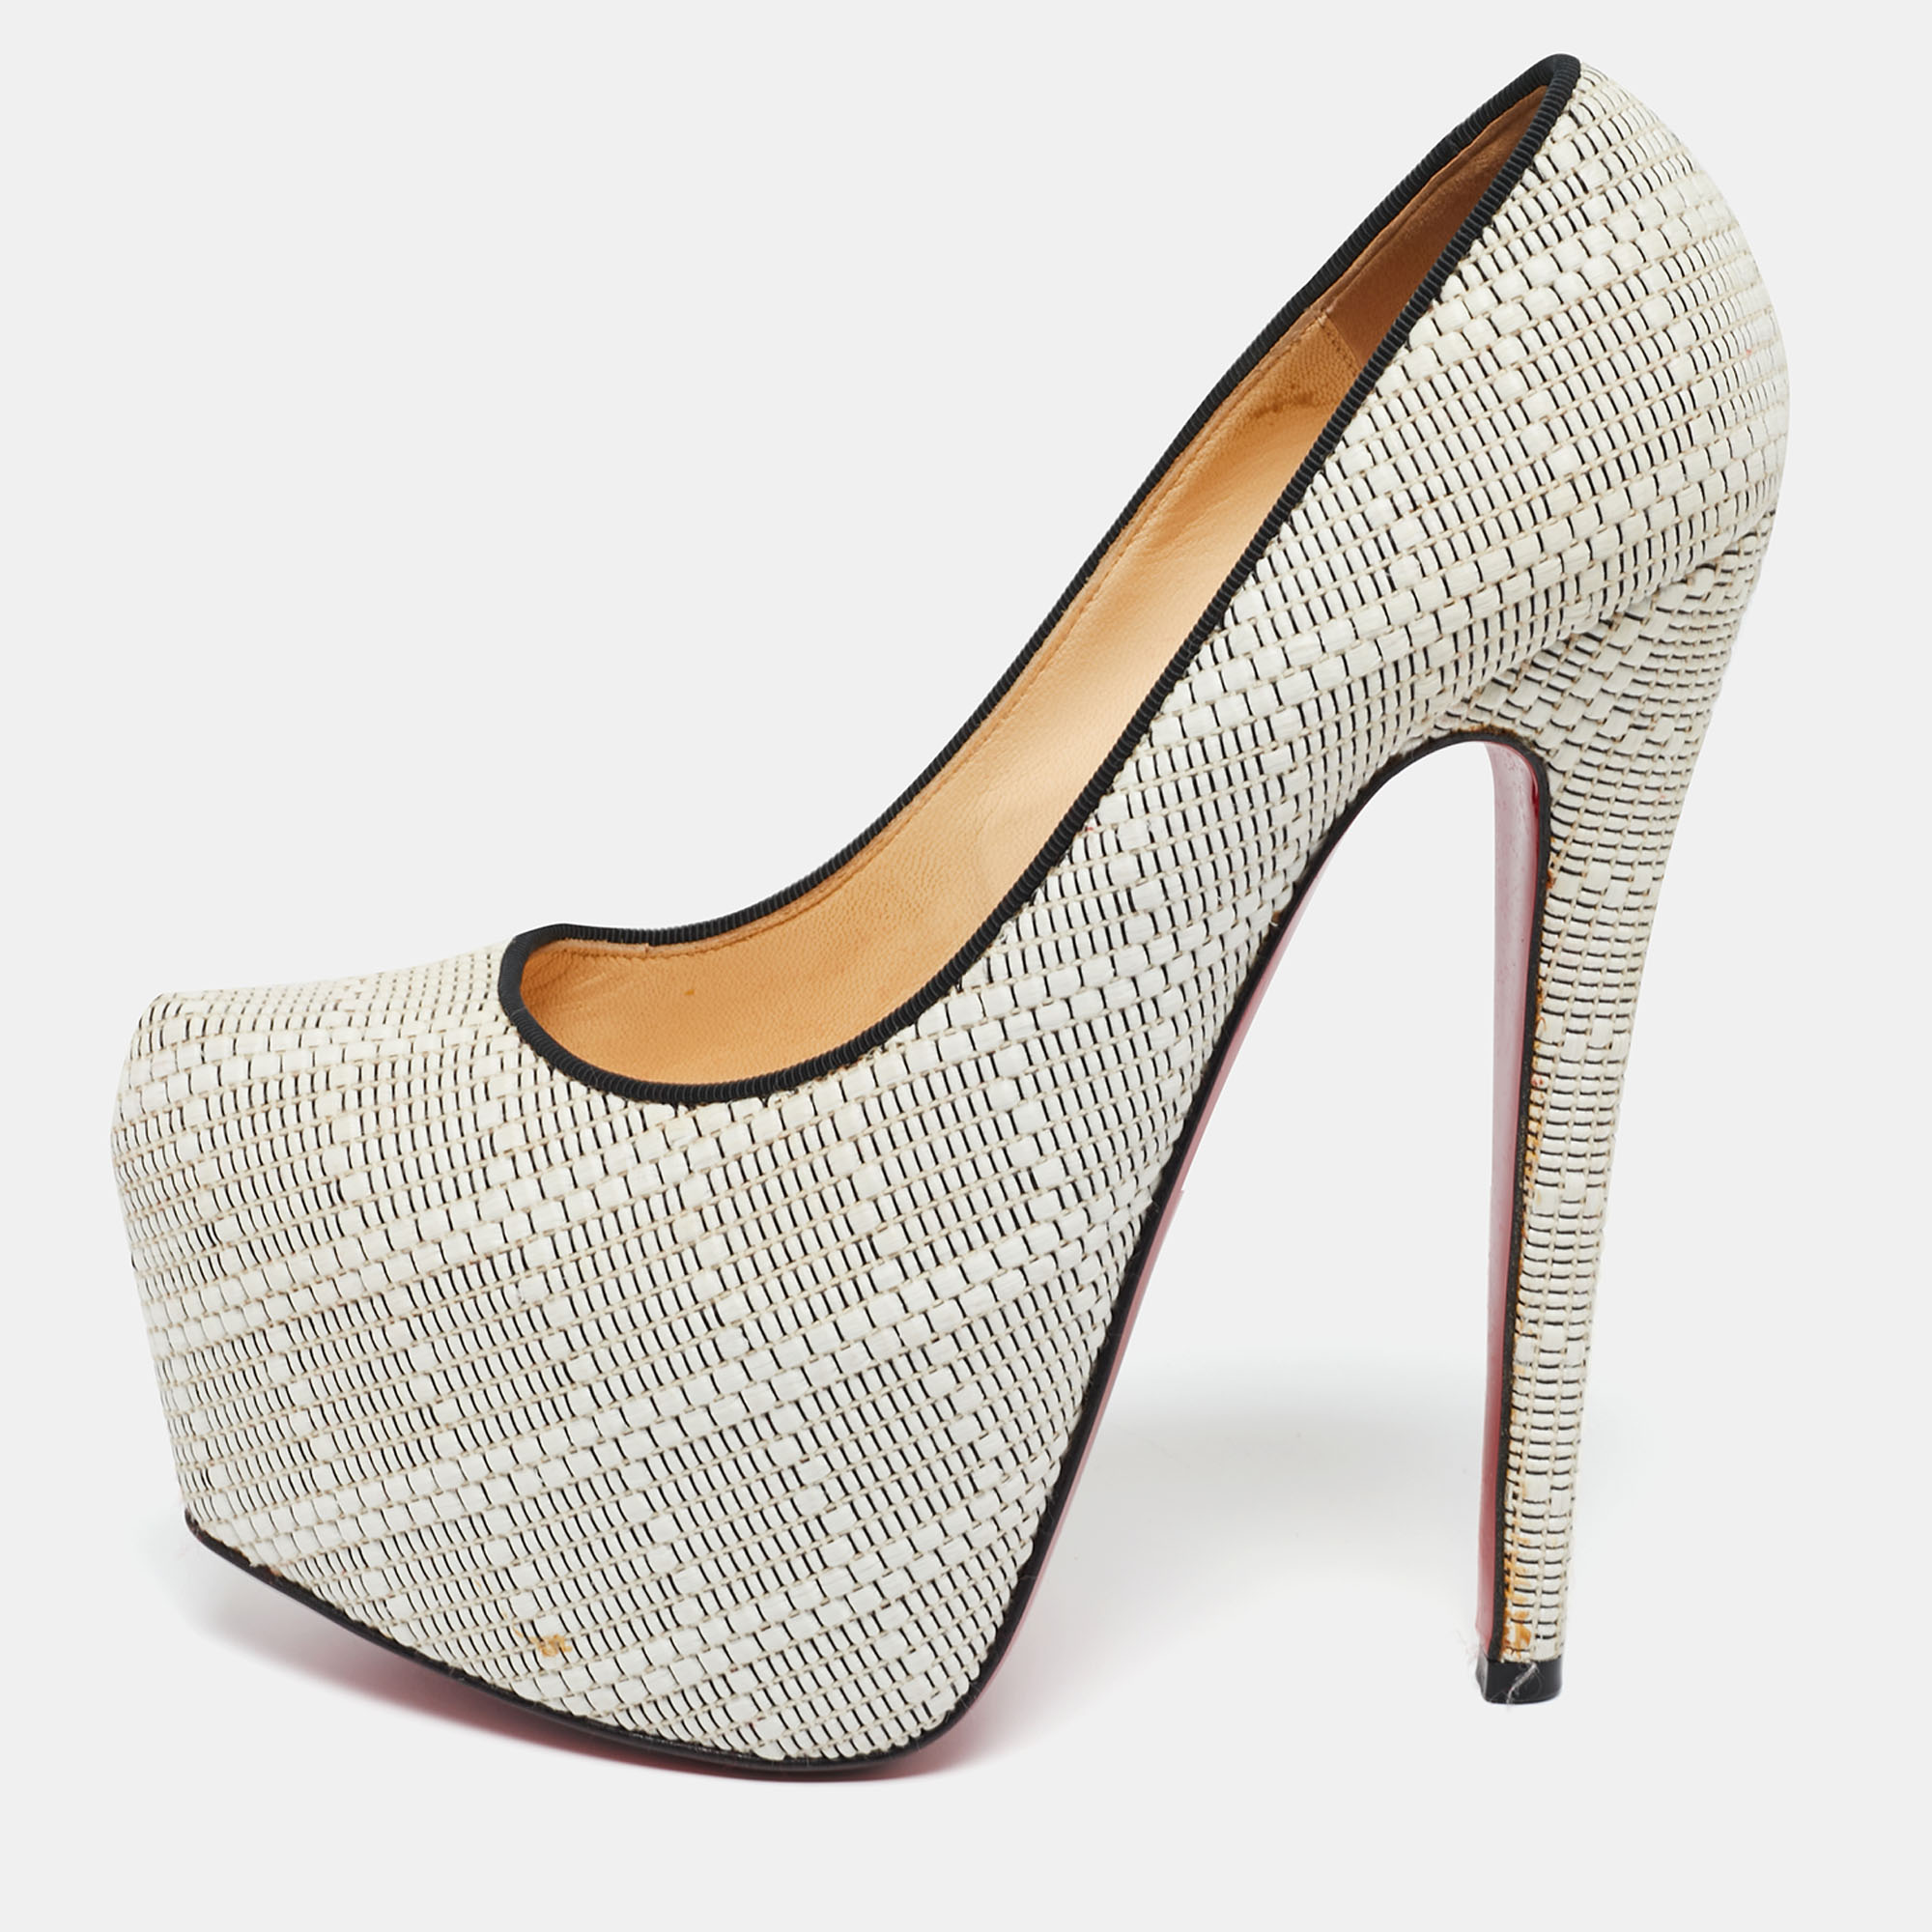 Take your love for Louboutins to new heights by adding this gorgeous pair to your collection. The stunning pumps are covered in raffia and elevated on platforms and 15 cm heels. The red soles add the signature finish that CL is loved for